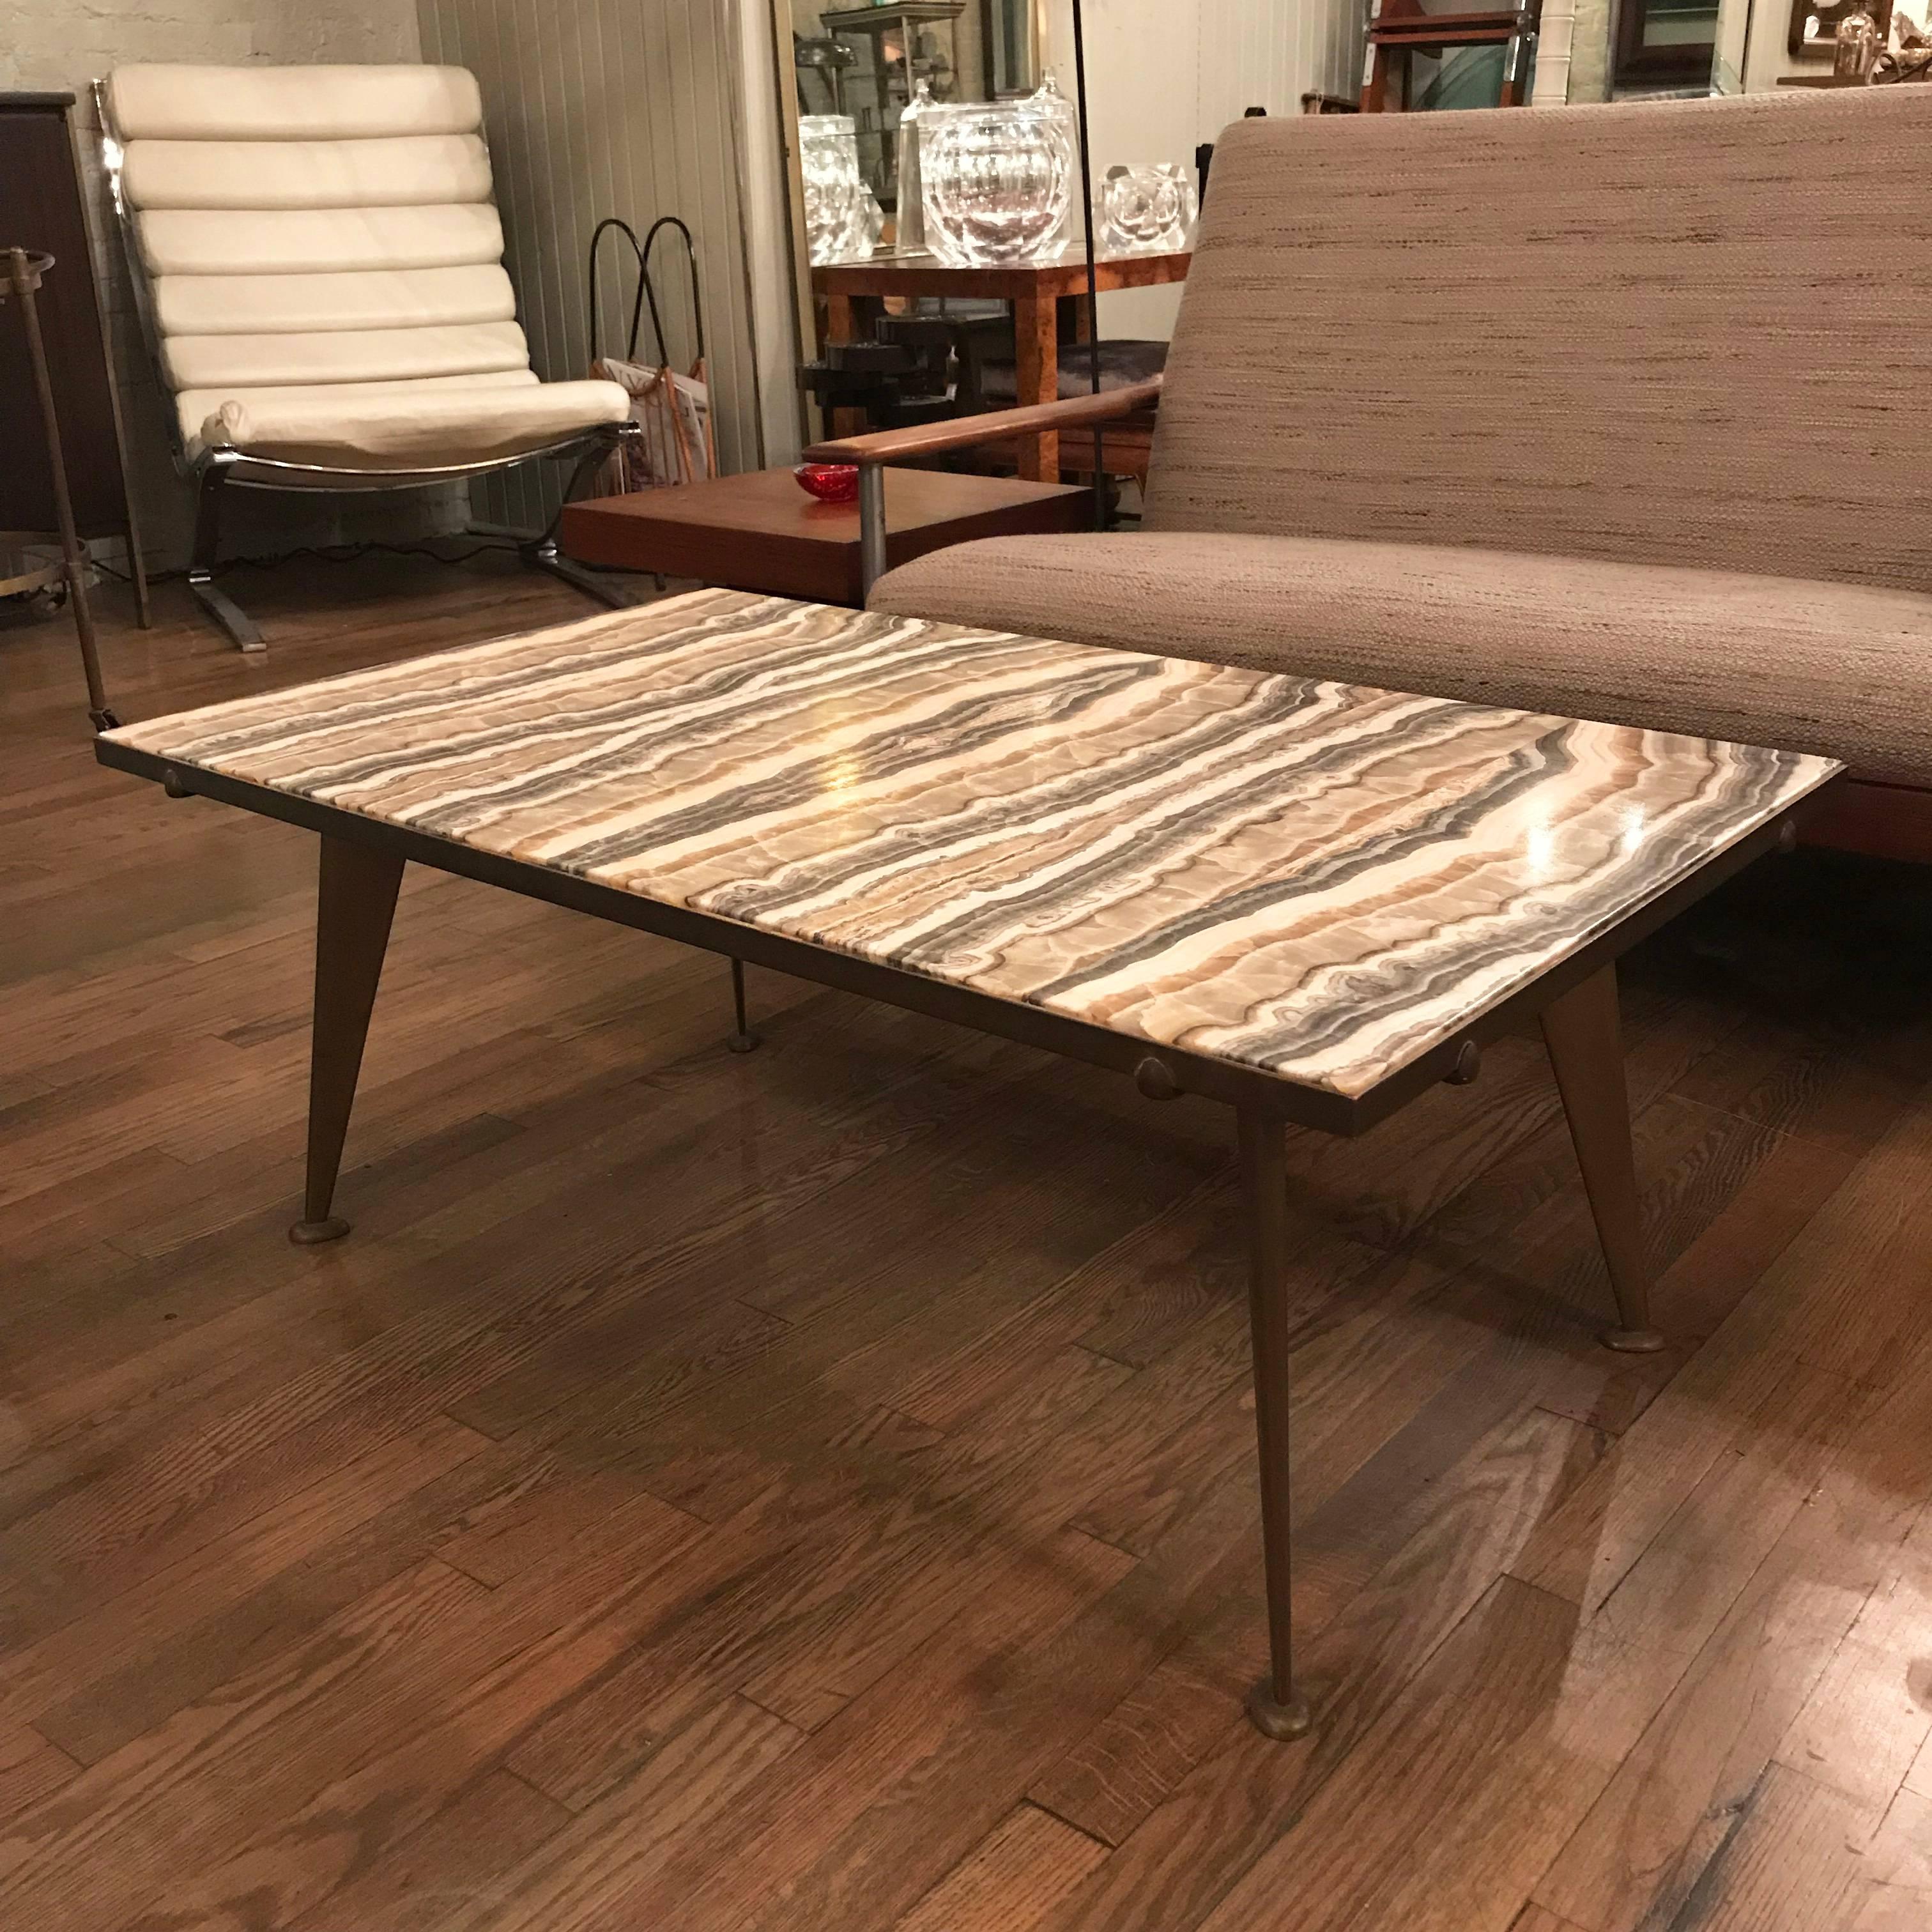 Rare, stunning, coffee table with book matched quartz top and bronze frame designed by the artist Richard Almond Blow circa 1950's. The table is marked Made In Italy with with his Montici 